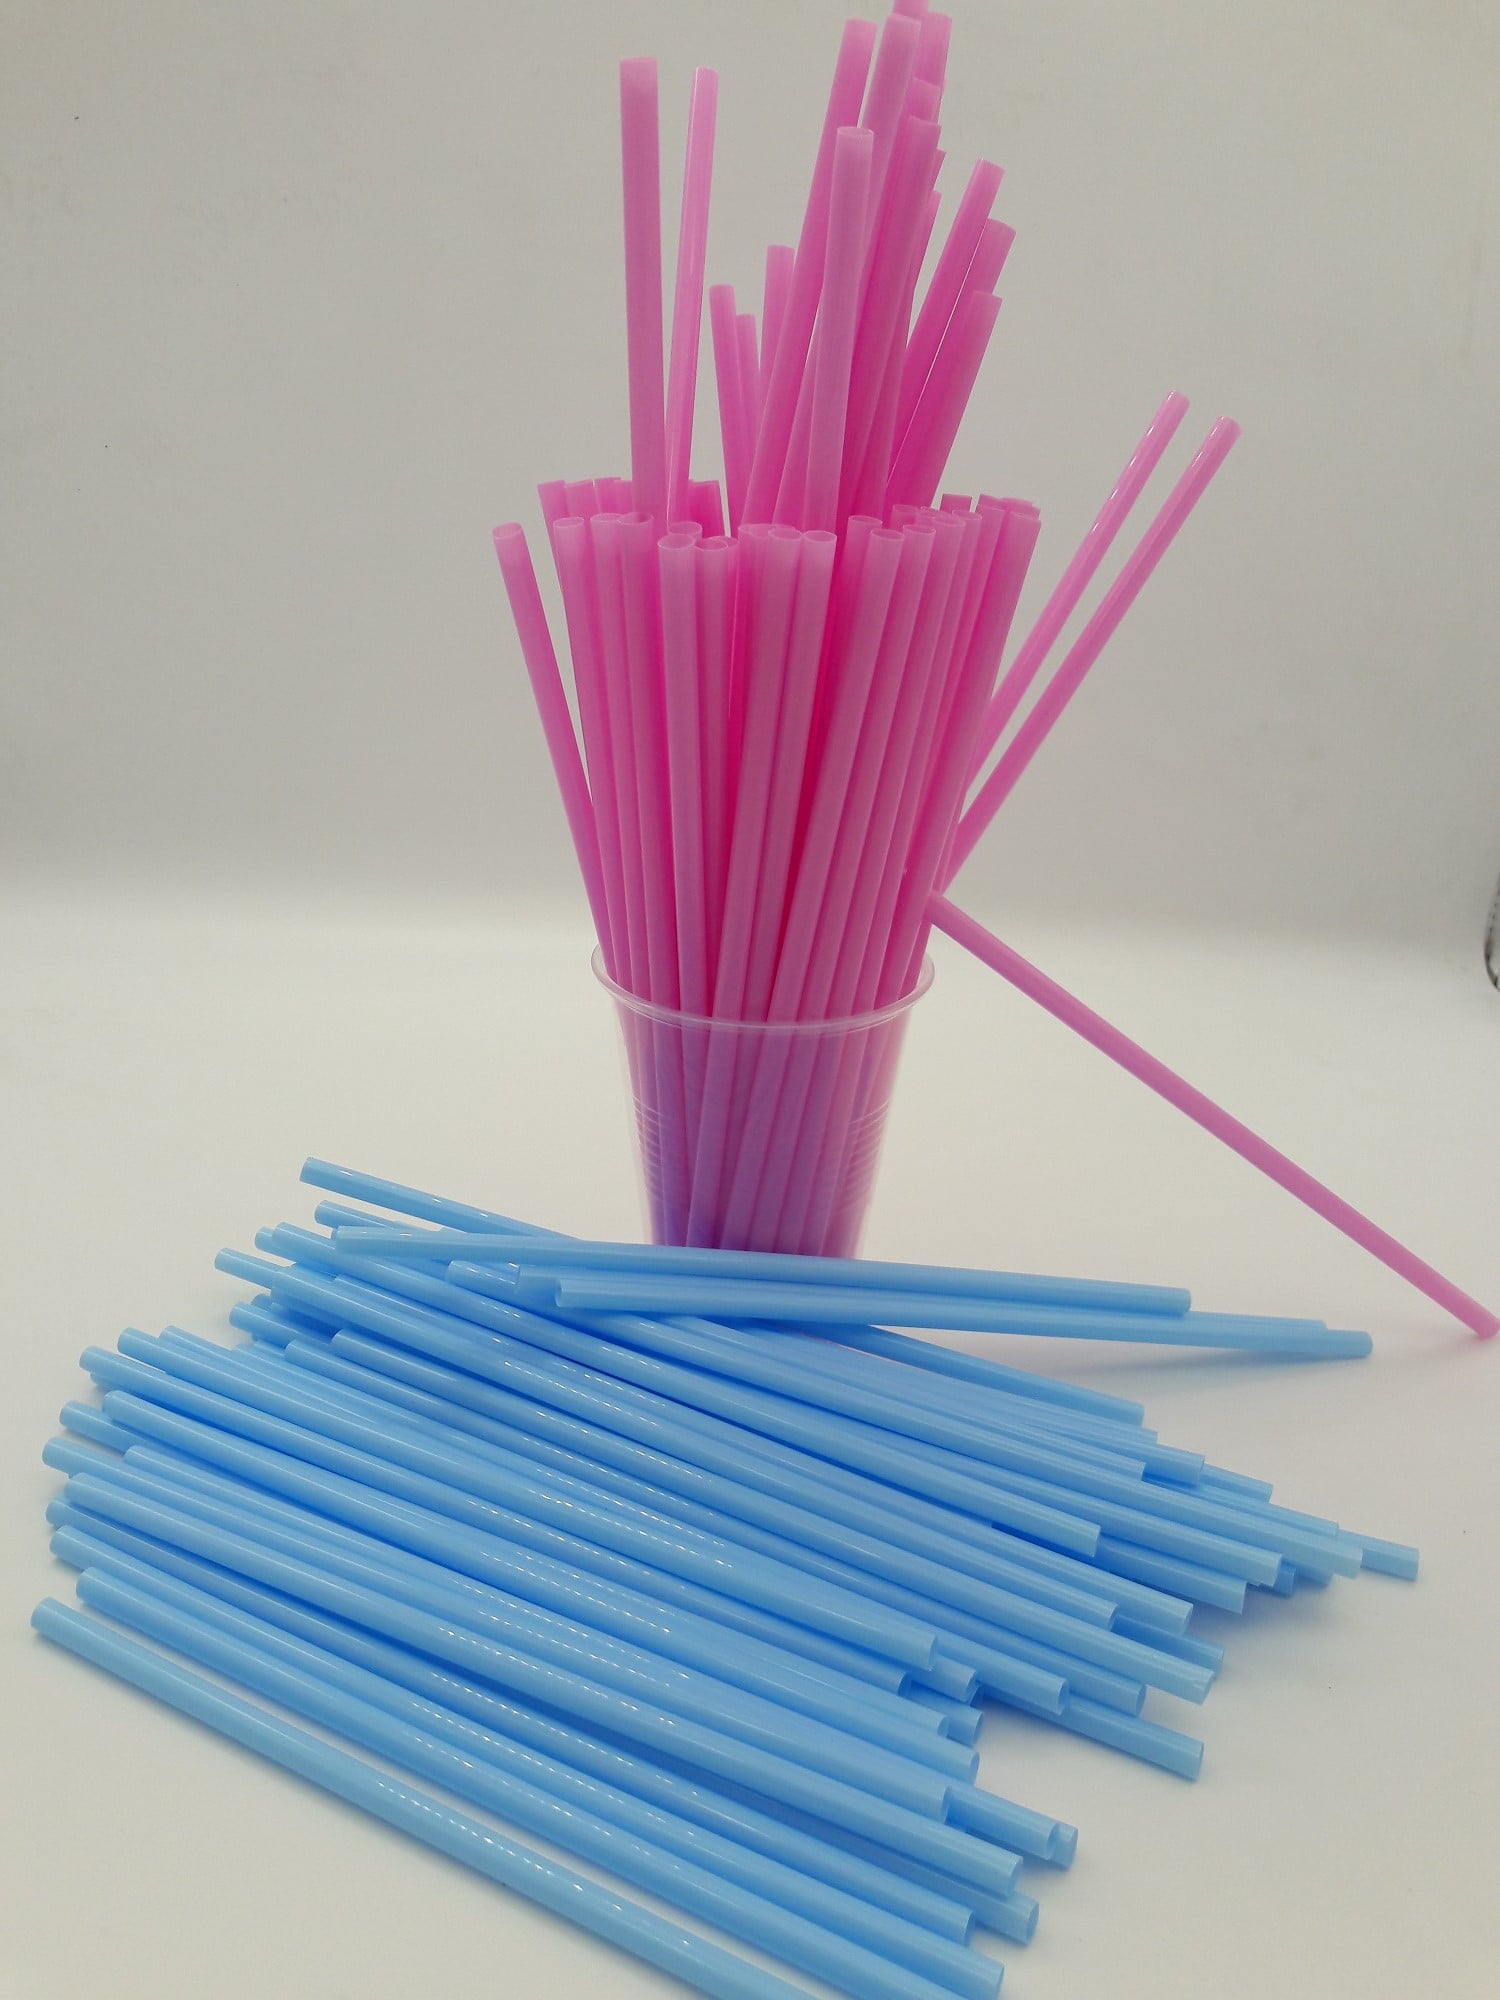 96 PCS Plastic Reusable Straws 6 Inches Short Assorted Color Plastic Straws  Fit Transparent Reusable Drinking Straws with Straw Cleaner Brush for